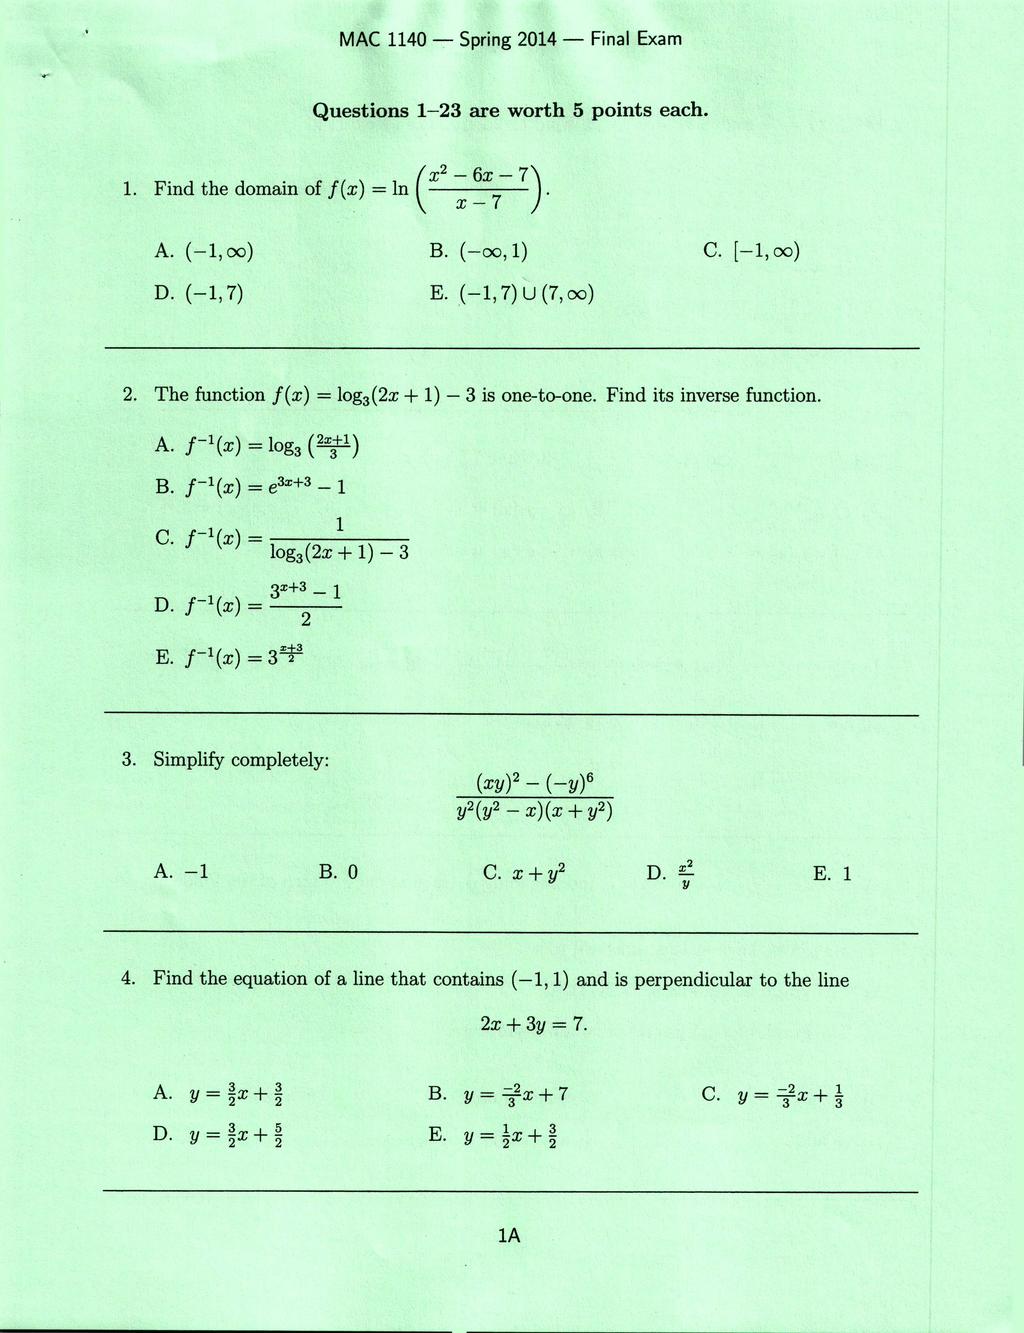 .' Questions 1-23 are worth 5 points each. 6x-7) X2-1. Find the domain of f(x) = In ( x _ 7. A. (-1,00) D. (-1,7) B. (-00,1) E. (-1,7) U (7,00) C. [-1,00) 2.